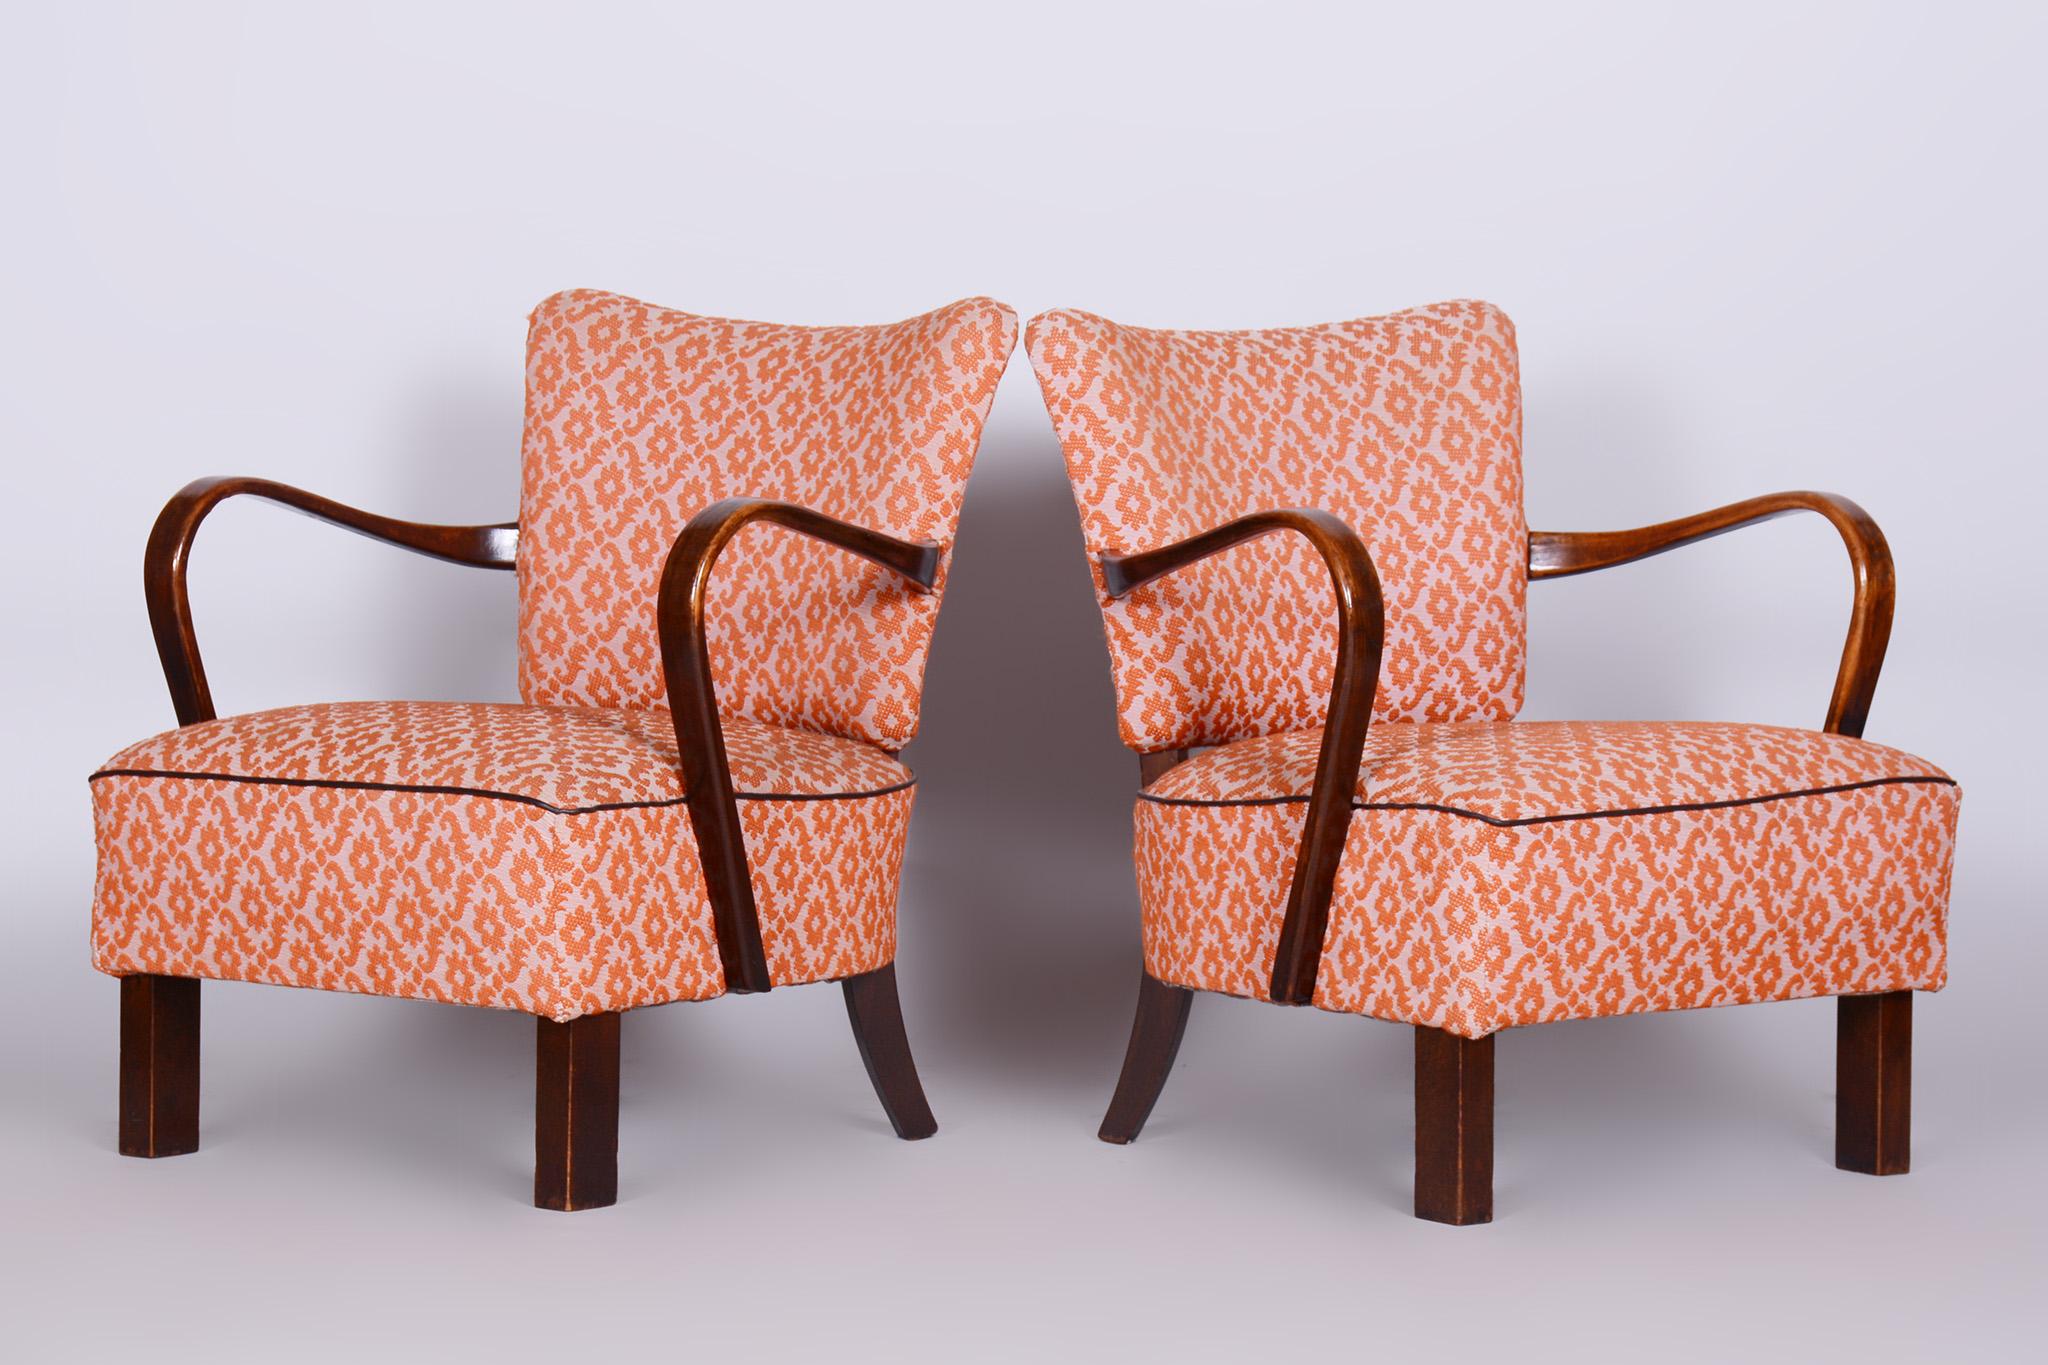 Pair of Beech Art Deco Armchairs Made in 1930s, Czechia, Revived Polish In Good Condition For Sale In Horomerice, CZ